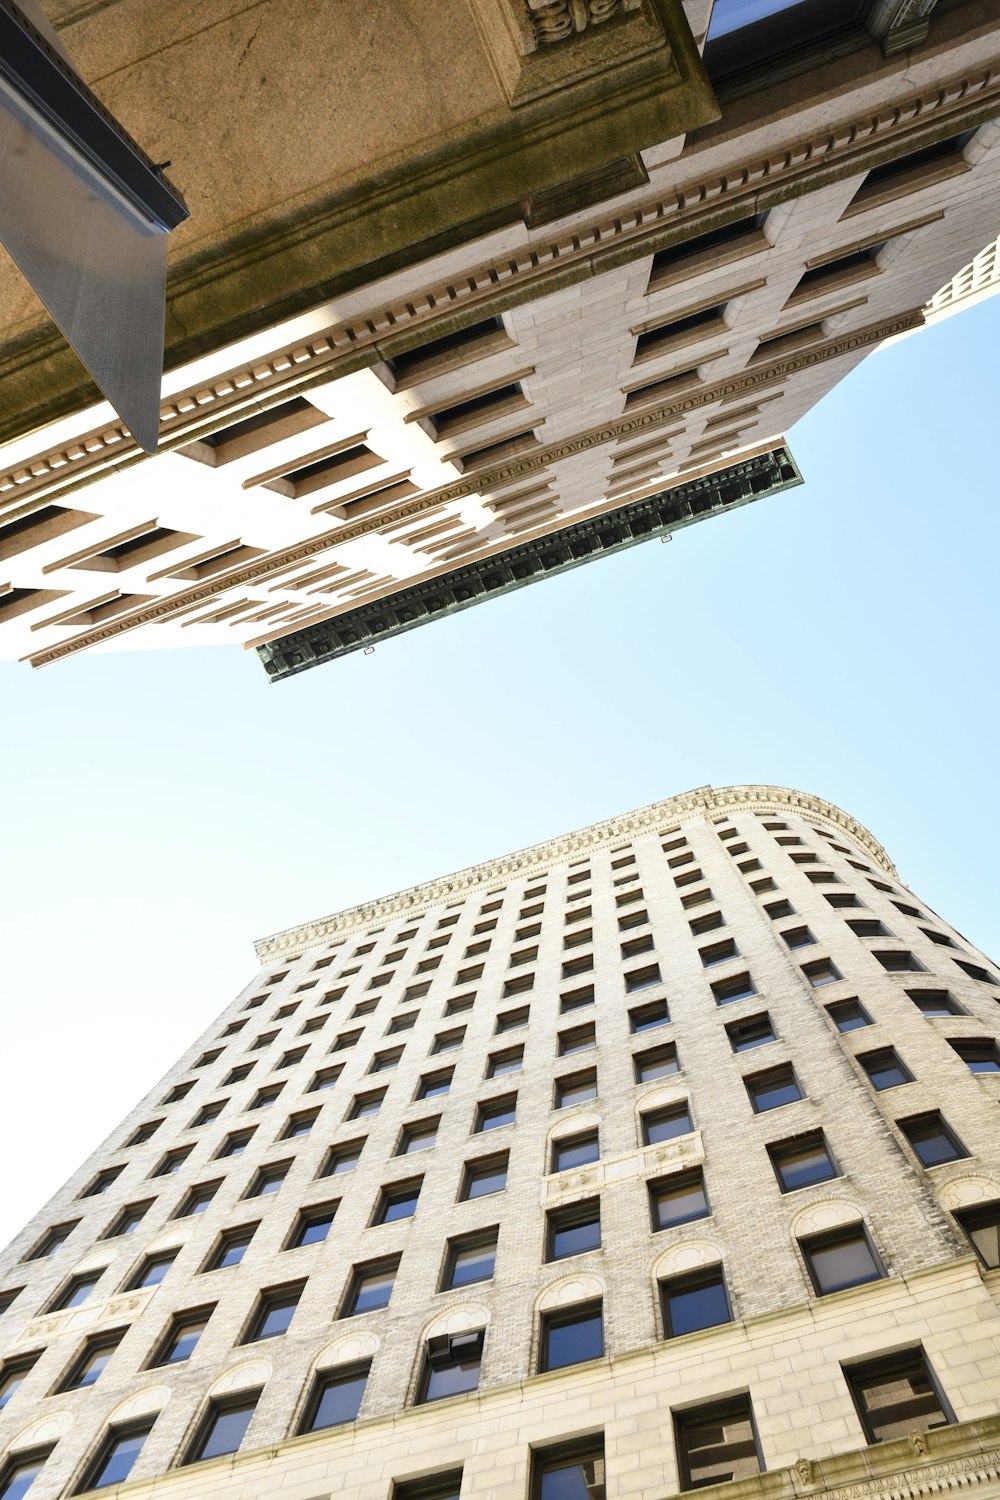 looking up at a tall building from the ground